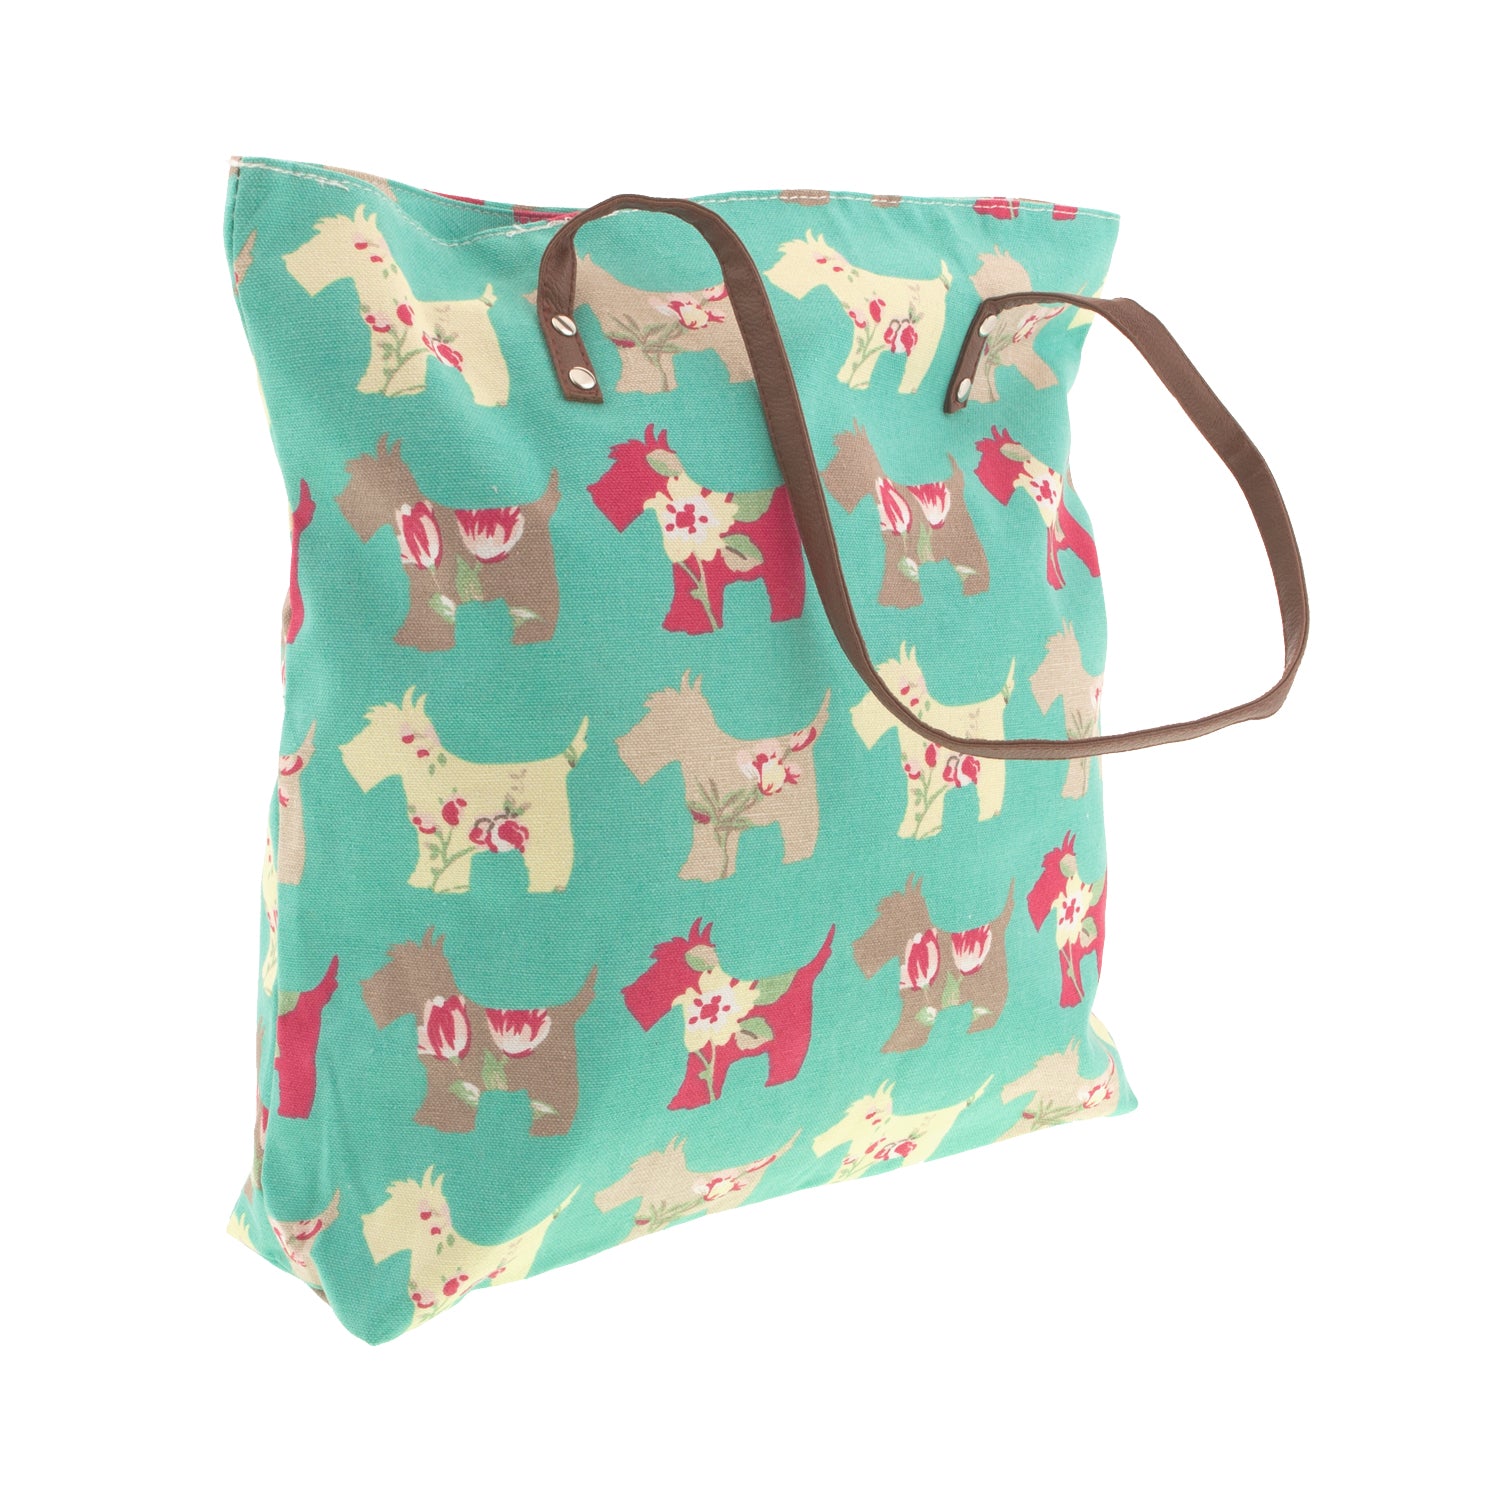 Dog Krazy Gifts – Mint Scottie Dog Shopping Bag, part of the Scottish Terrier range of products available from DogKrazyGifts.co.uk